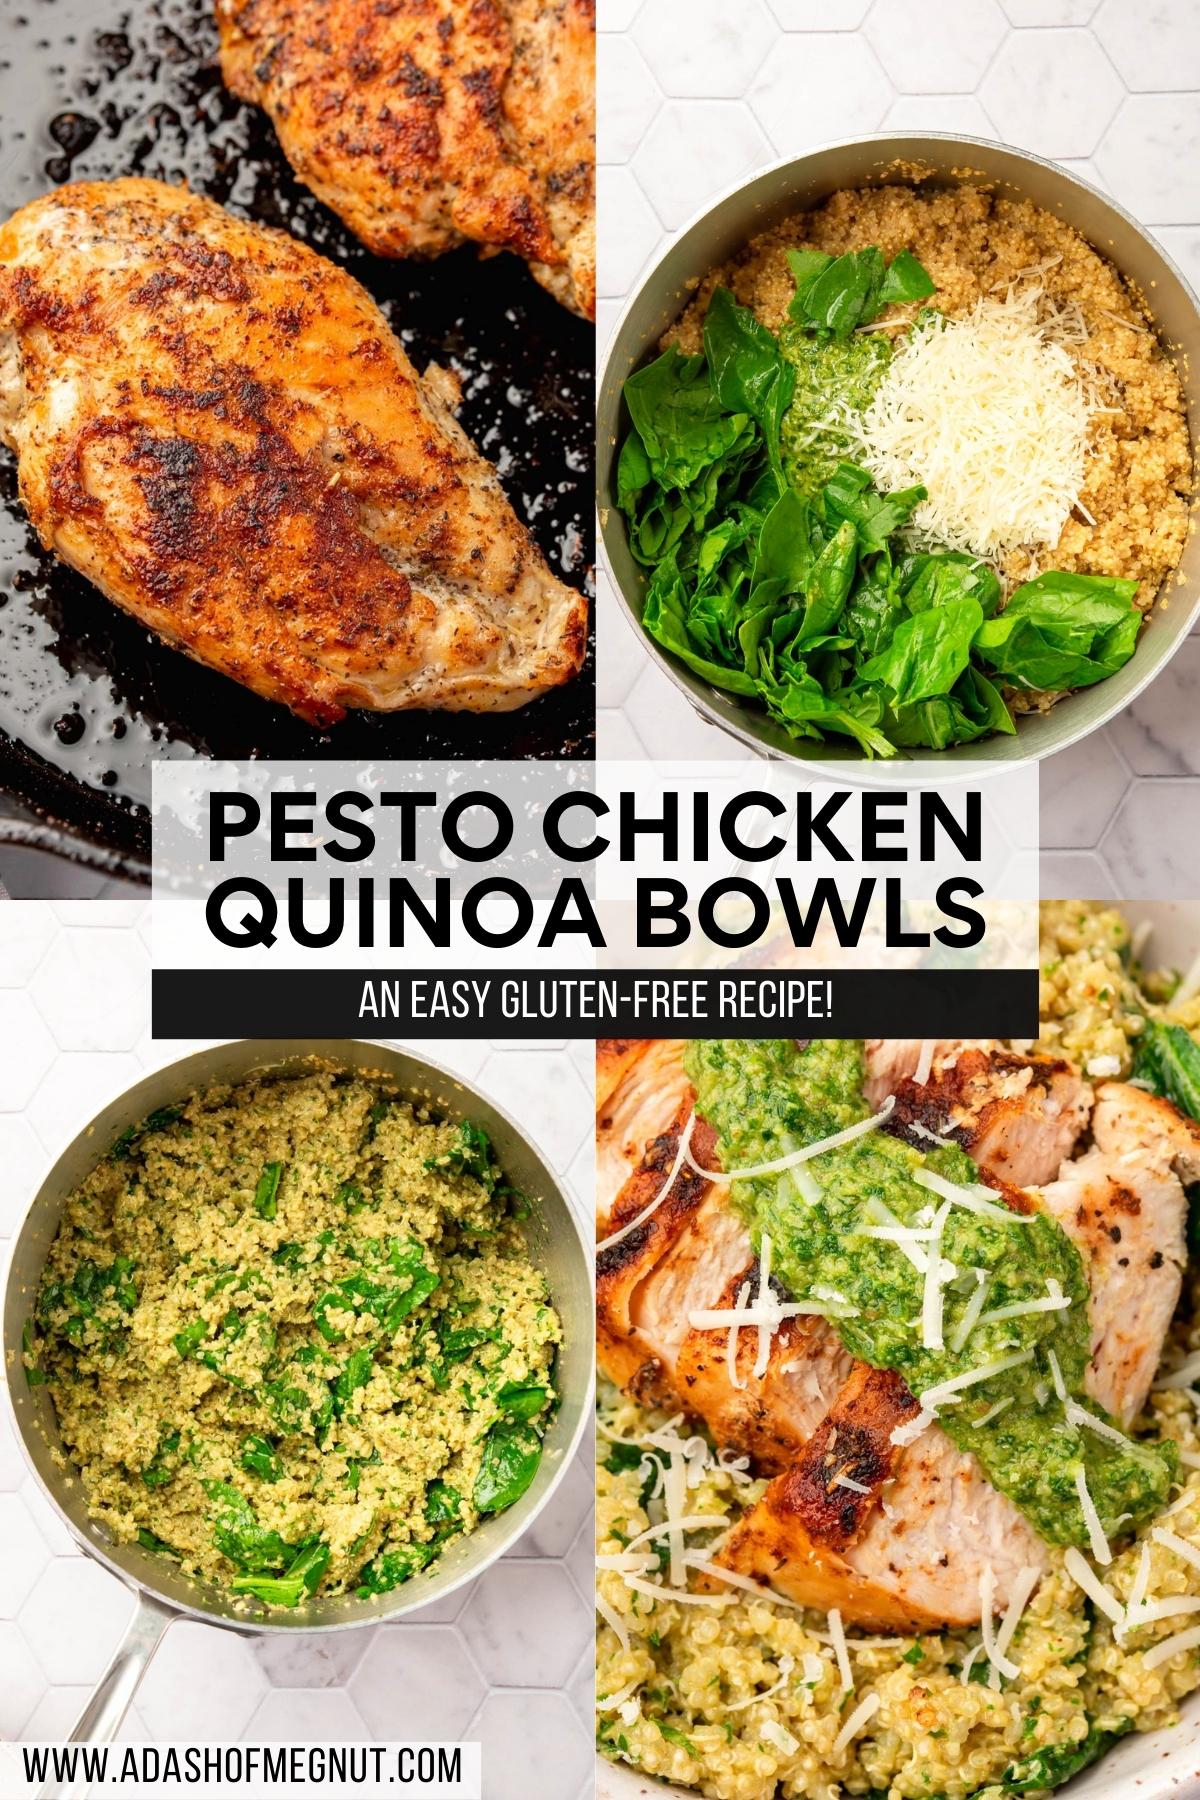 A four photo collage showing the process of making pesto chicken quinoa bowls. Photo 1: Two cooked chicken breasts in a cast iron skillet. Photo 2: A stainless steel pot with quinoa, pesto, shredded parmesan cheese, and spinach before mixing together. Photo 3: A stainless steel pot with quinoa mixed with spinach and pesto. Photo 4; A closeup of a bowl of spinach pesto quinoa topped with sliced chicken breast, parsley pesto and shredded parmesan cheese.